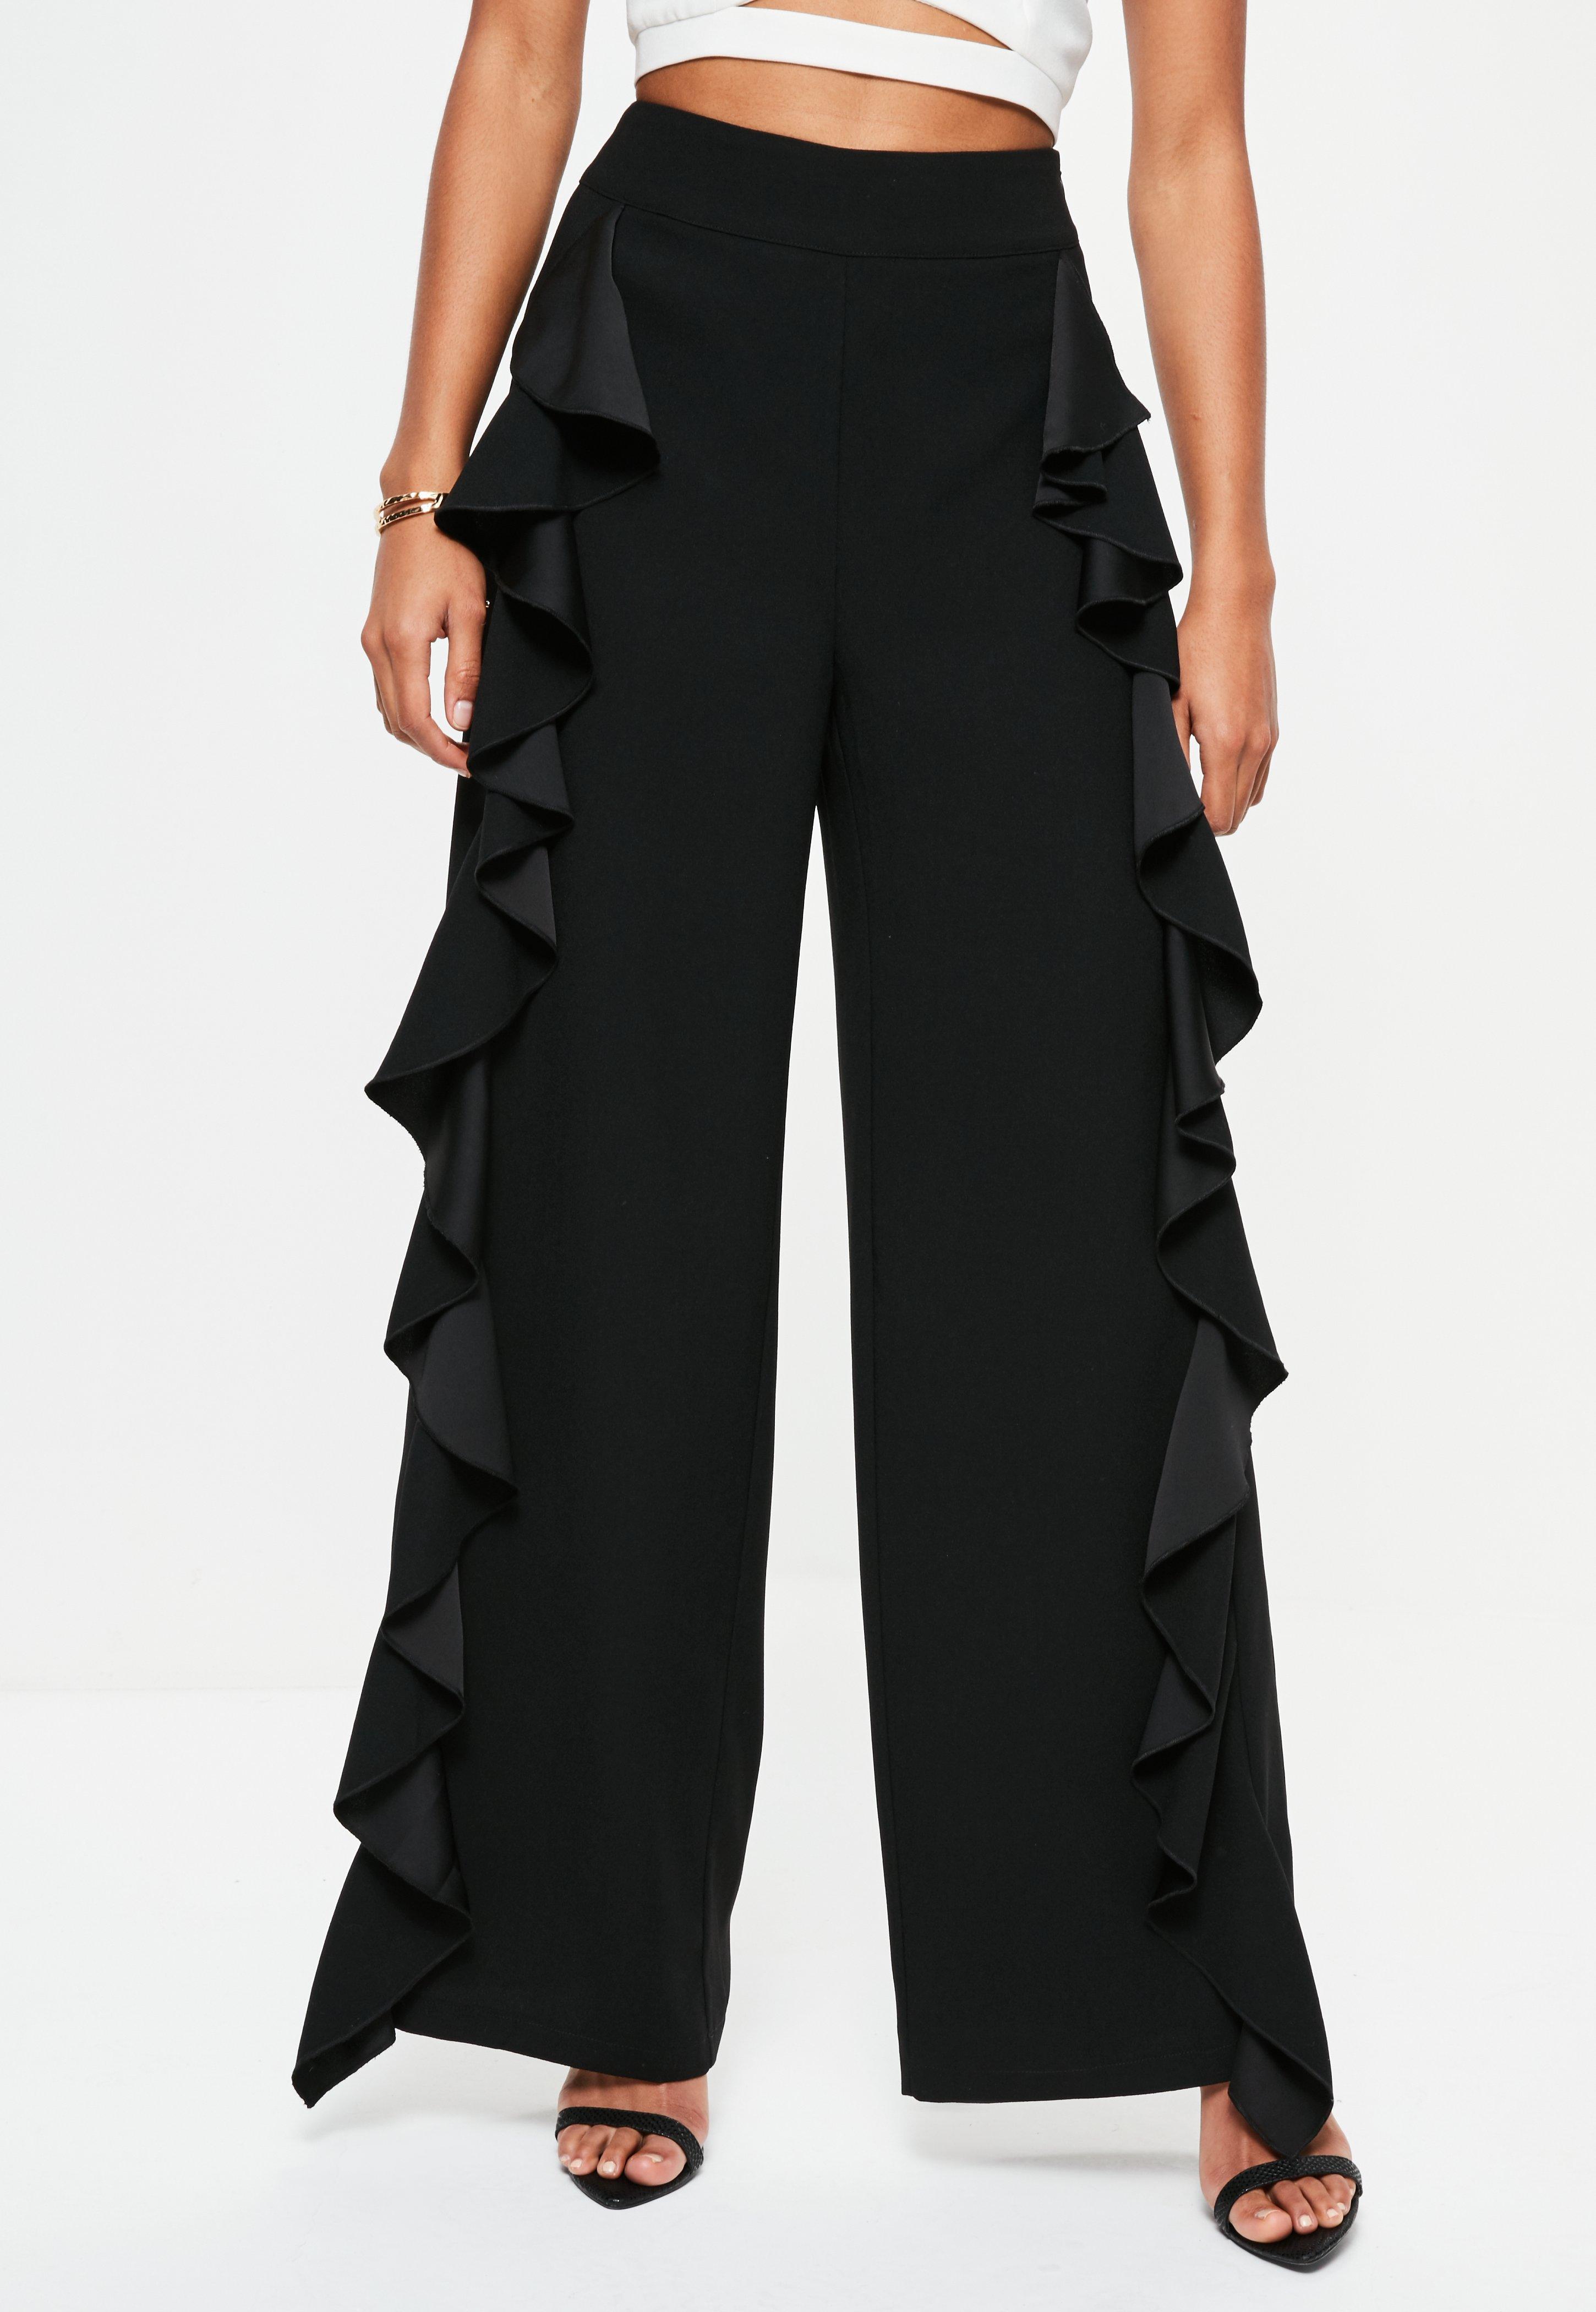 Lyst - Missguided Black Frill Side Wide Leg Trousers in Black